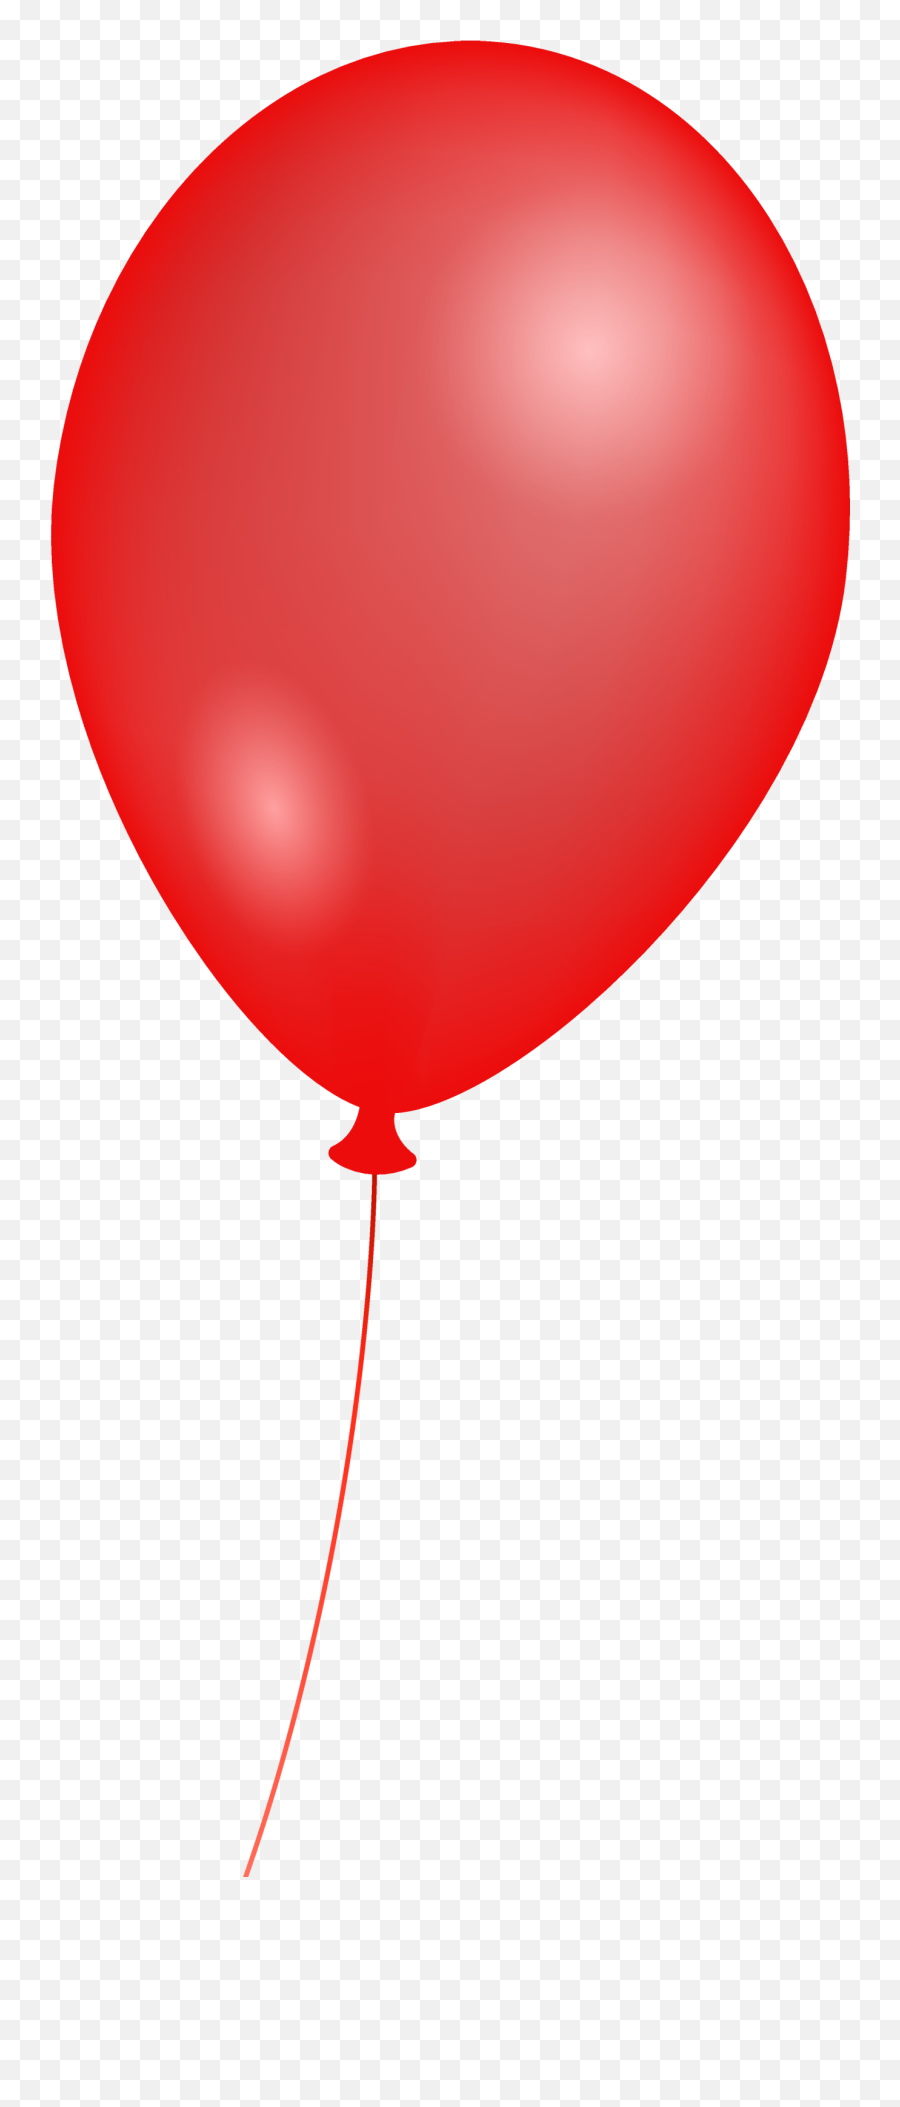 Png - Balloon Png Free Download,Png Image